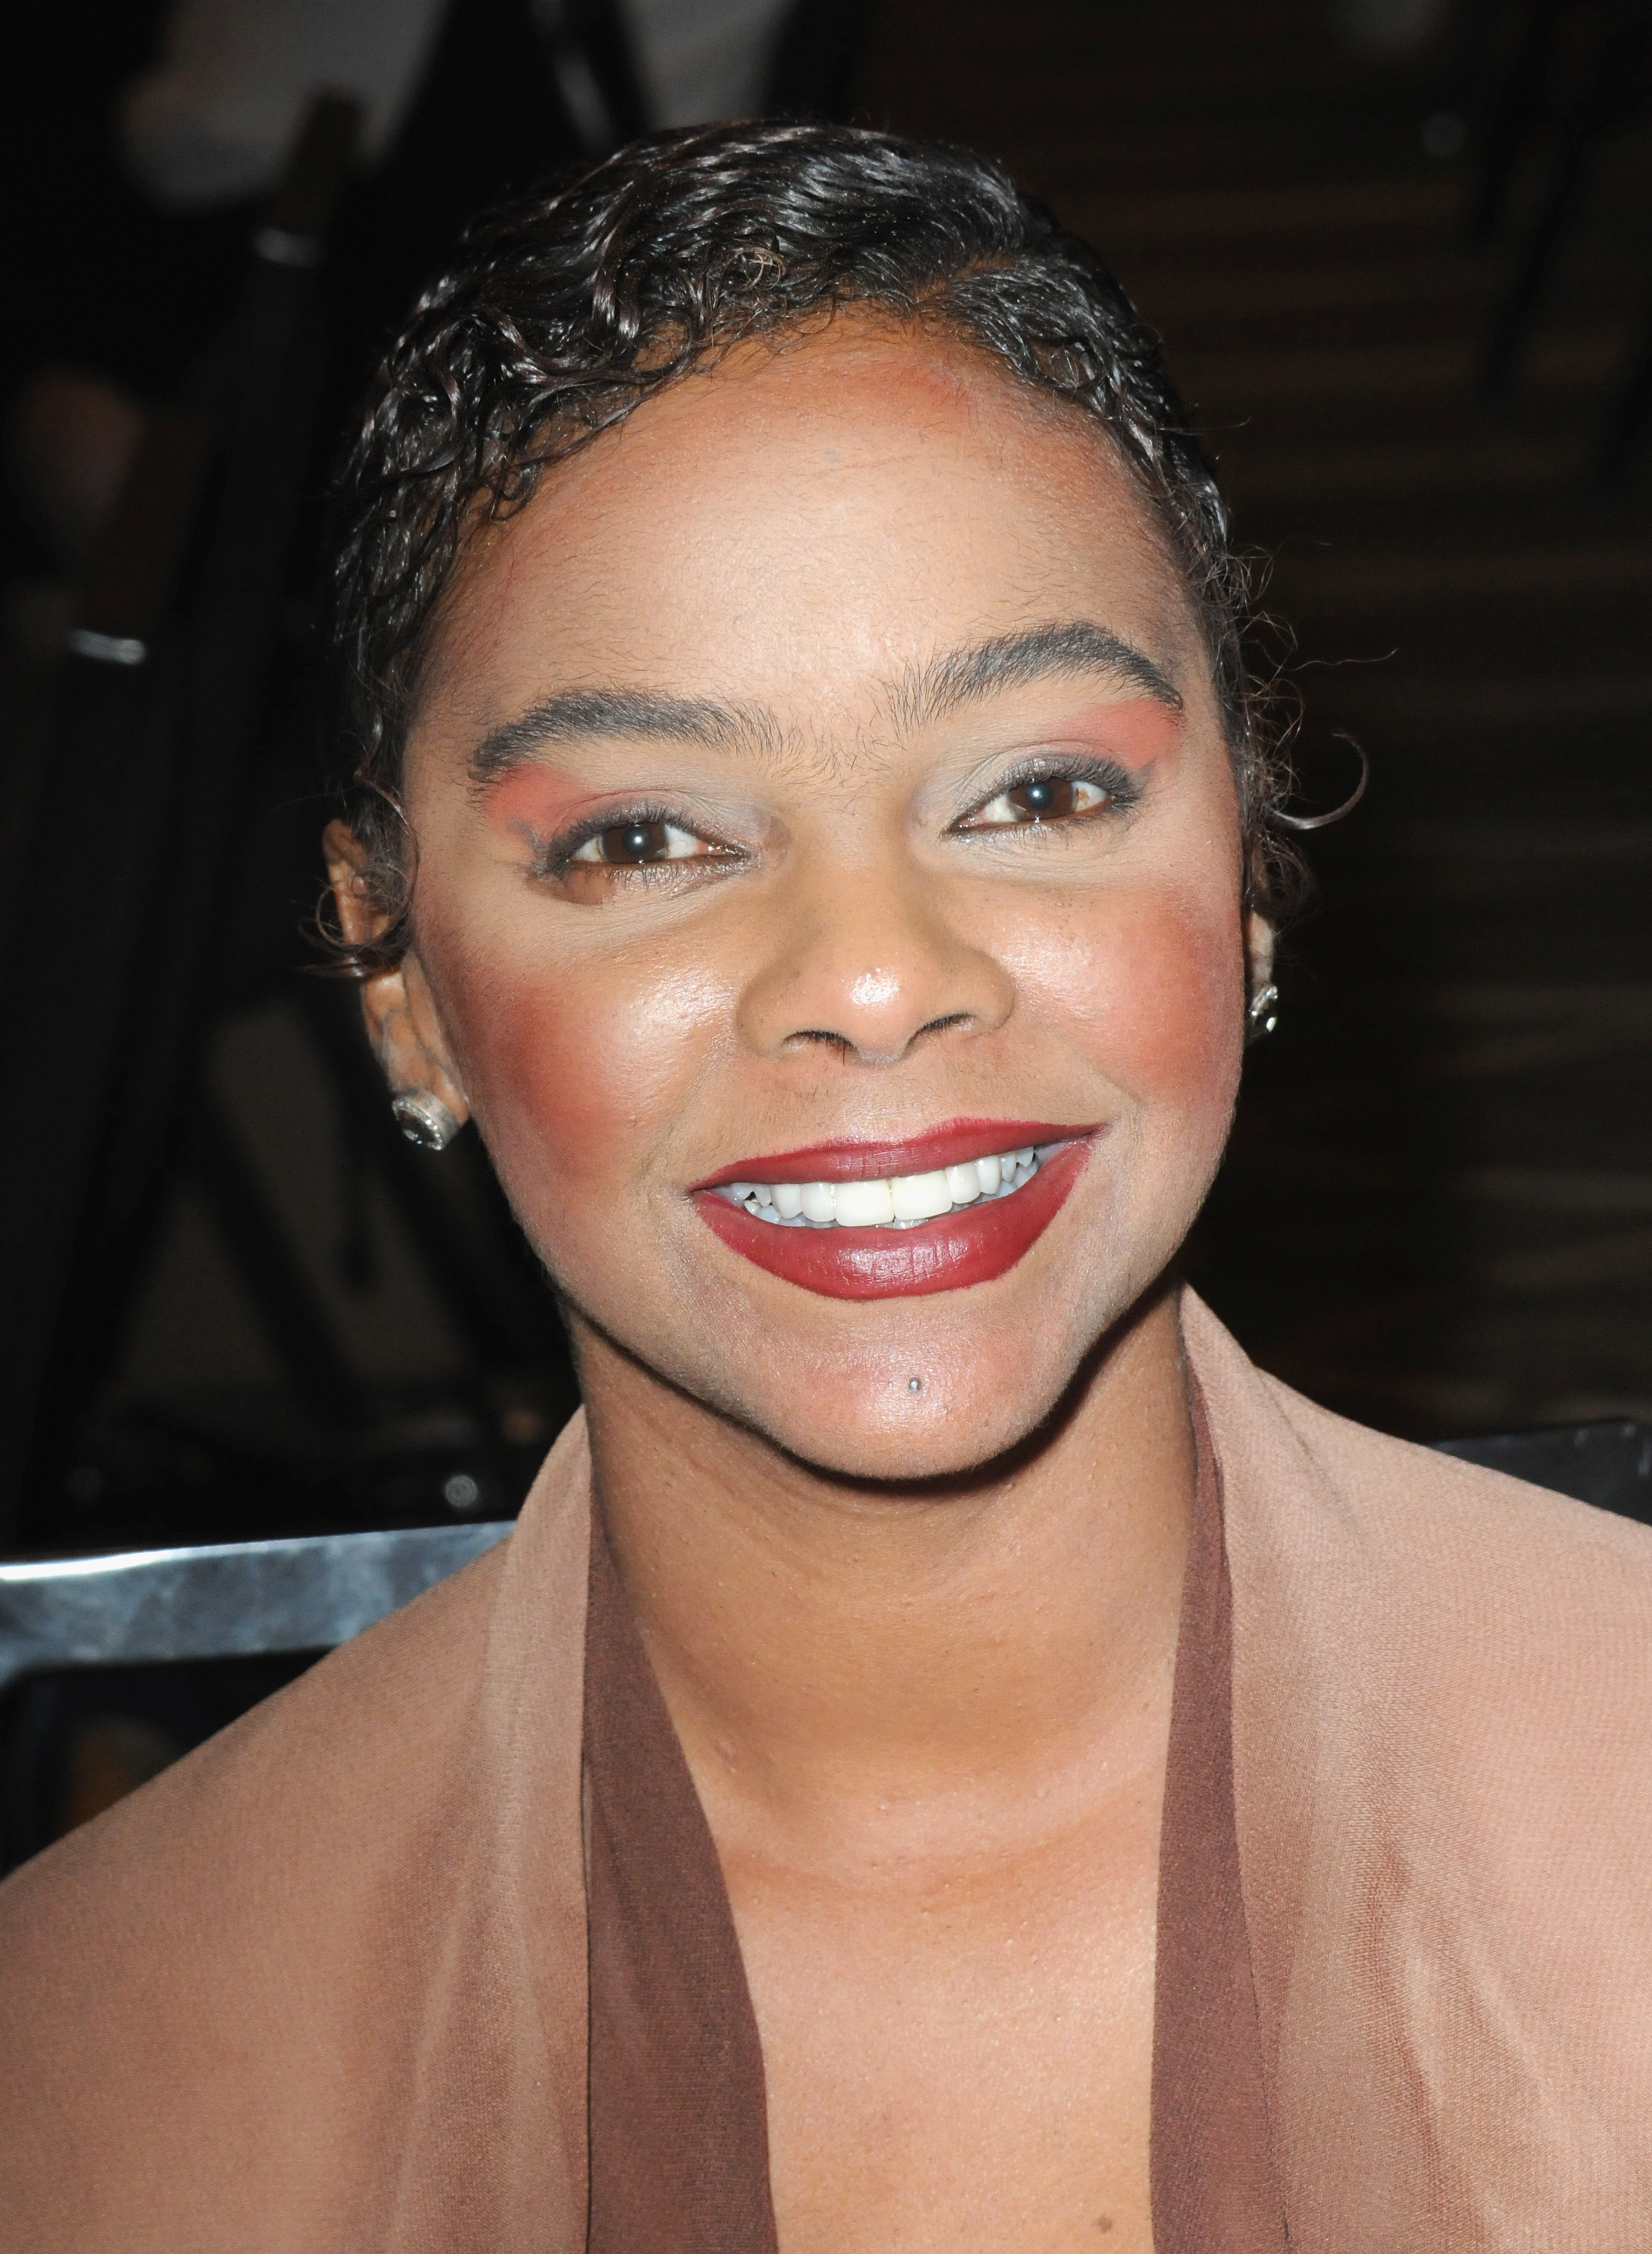 Lark Voorhies Says She’s 'Not African-American,' Shows Off Lighte...